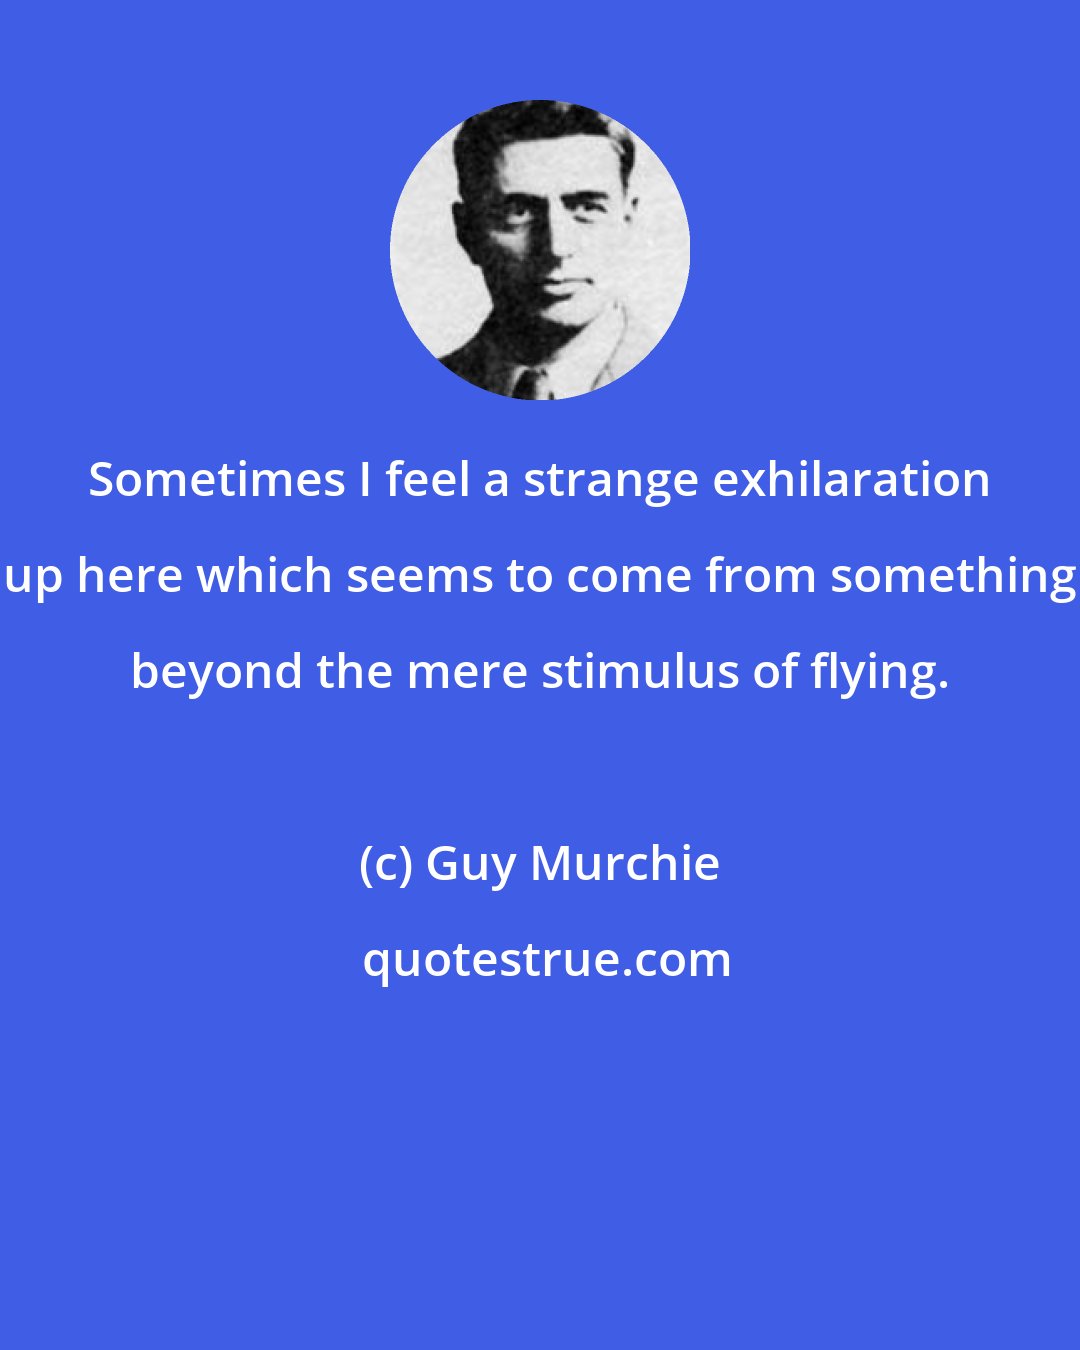 Guy Murchie: Sometimes I feel a strange exhilaration up here which seems to come from something beyond the mere stimulus of flying.